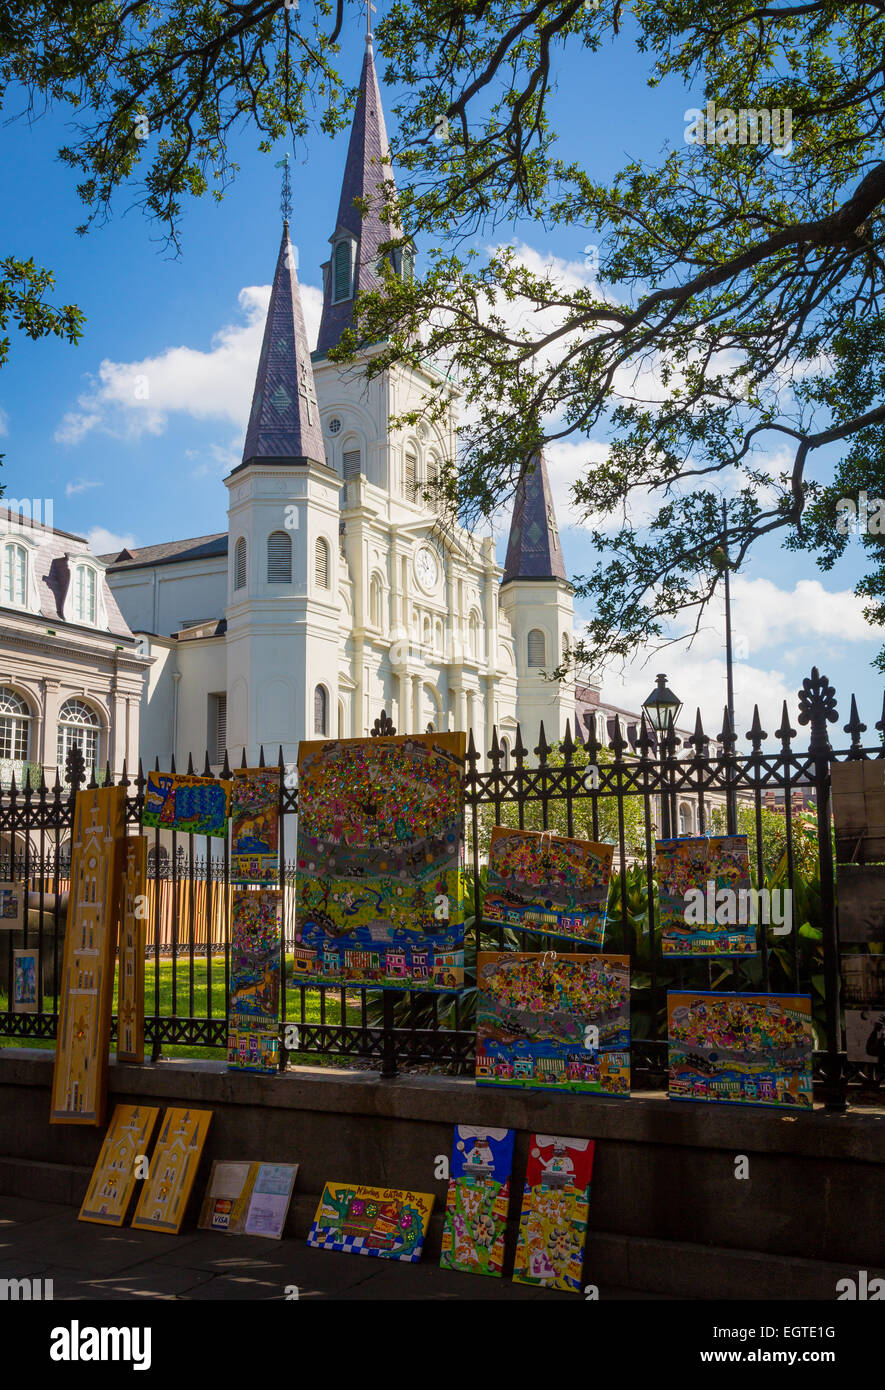 Jackson Square in the French Quarter, also known as the Vieux Carré, the oldest neighborhood in the city of New Orleans. Stock Photo